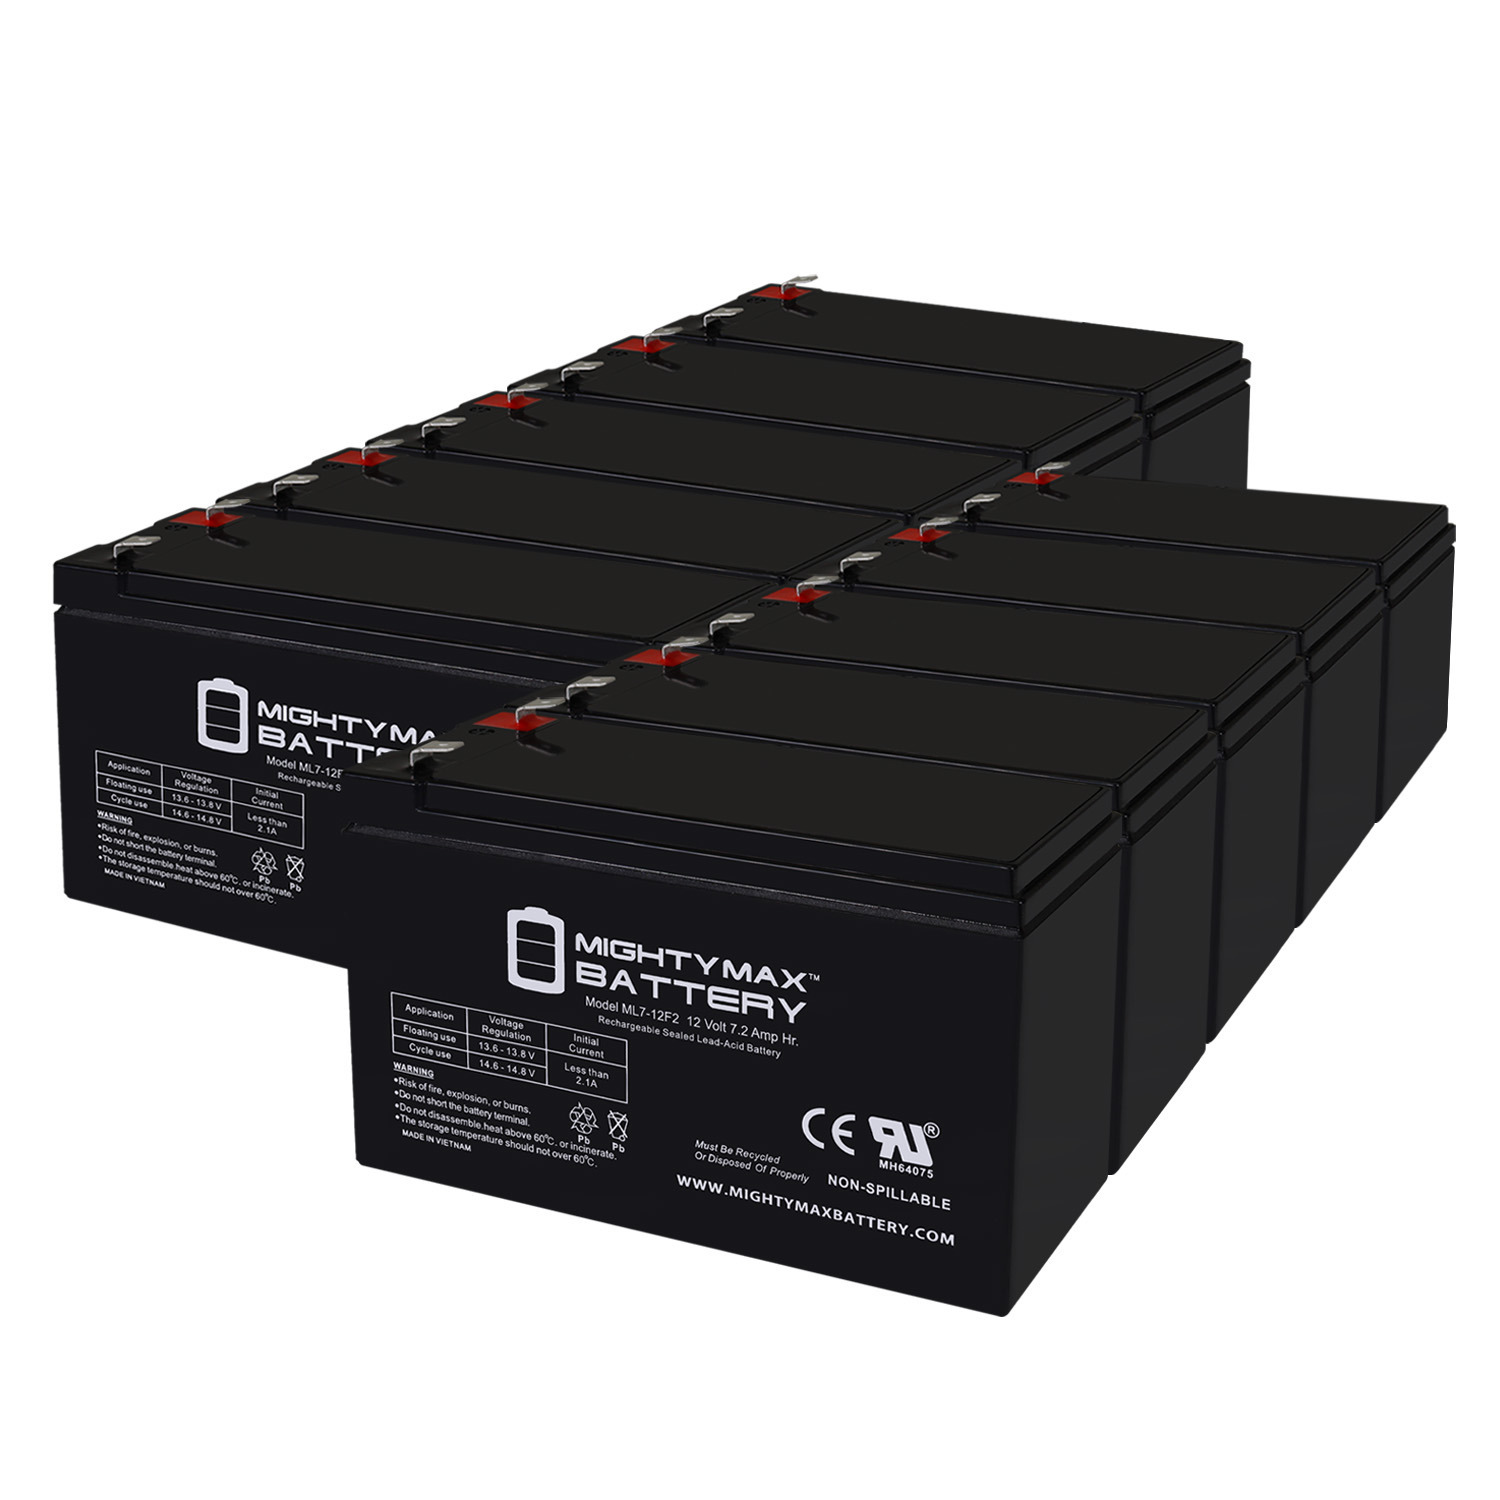 12V 7Ah F2 Replacement Battery for APC UPS SMT750US - 10 Pack